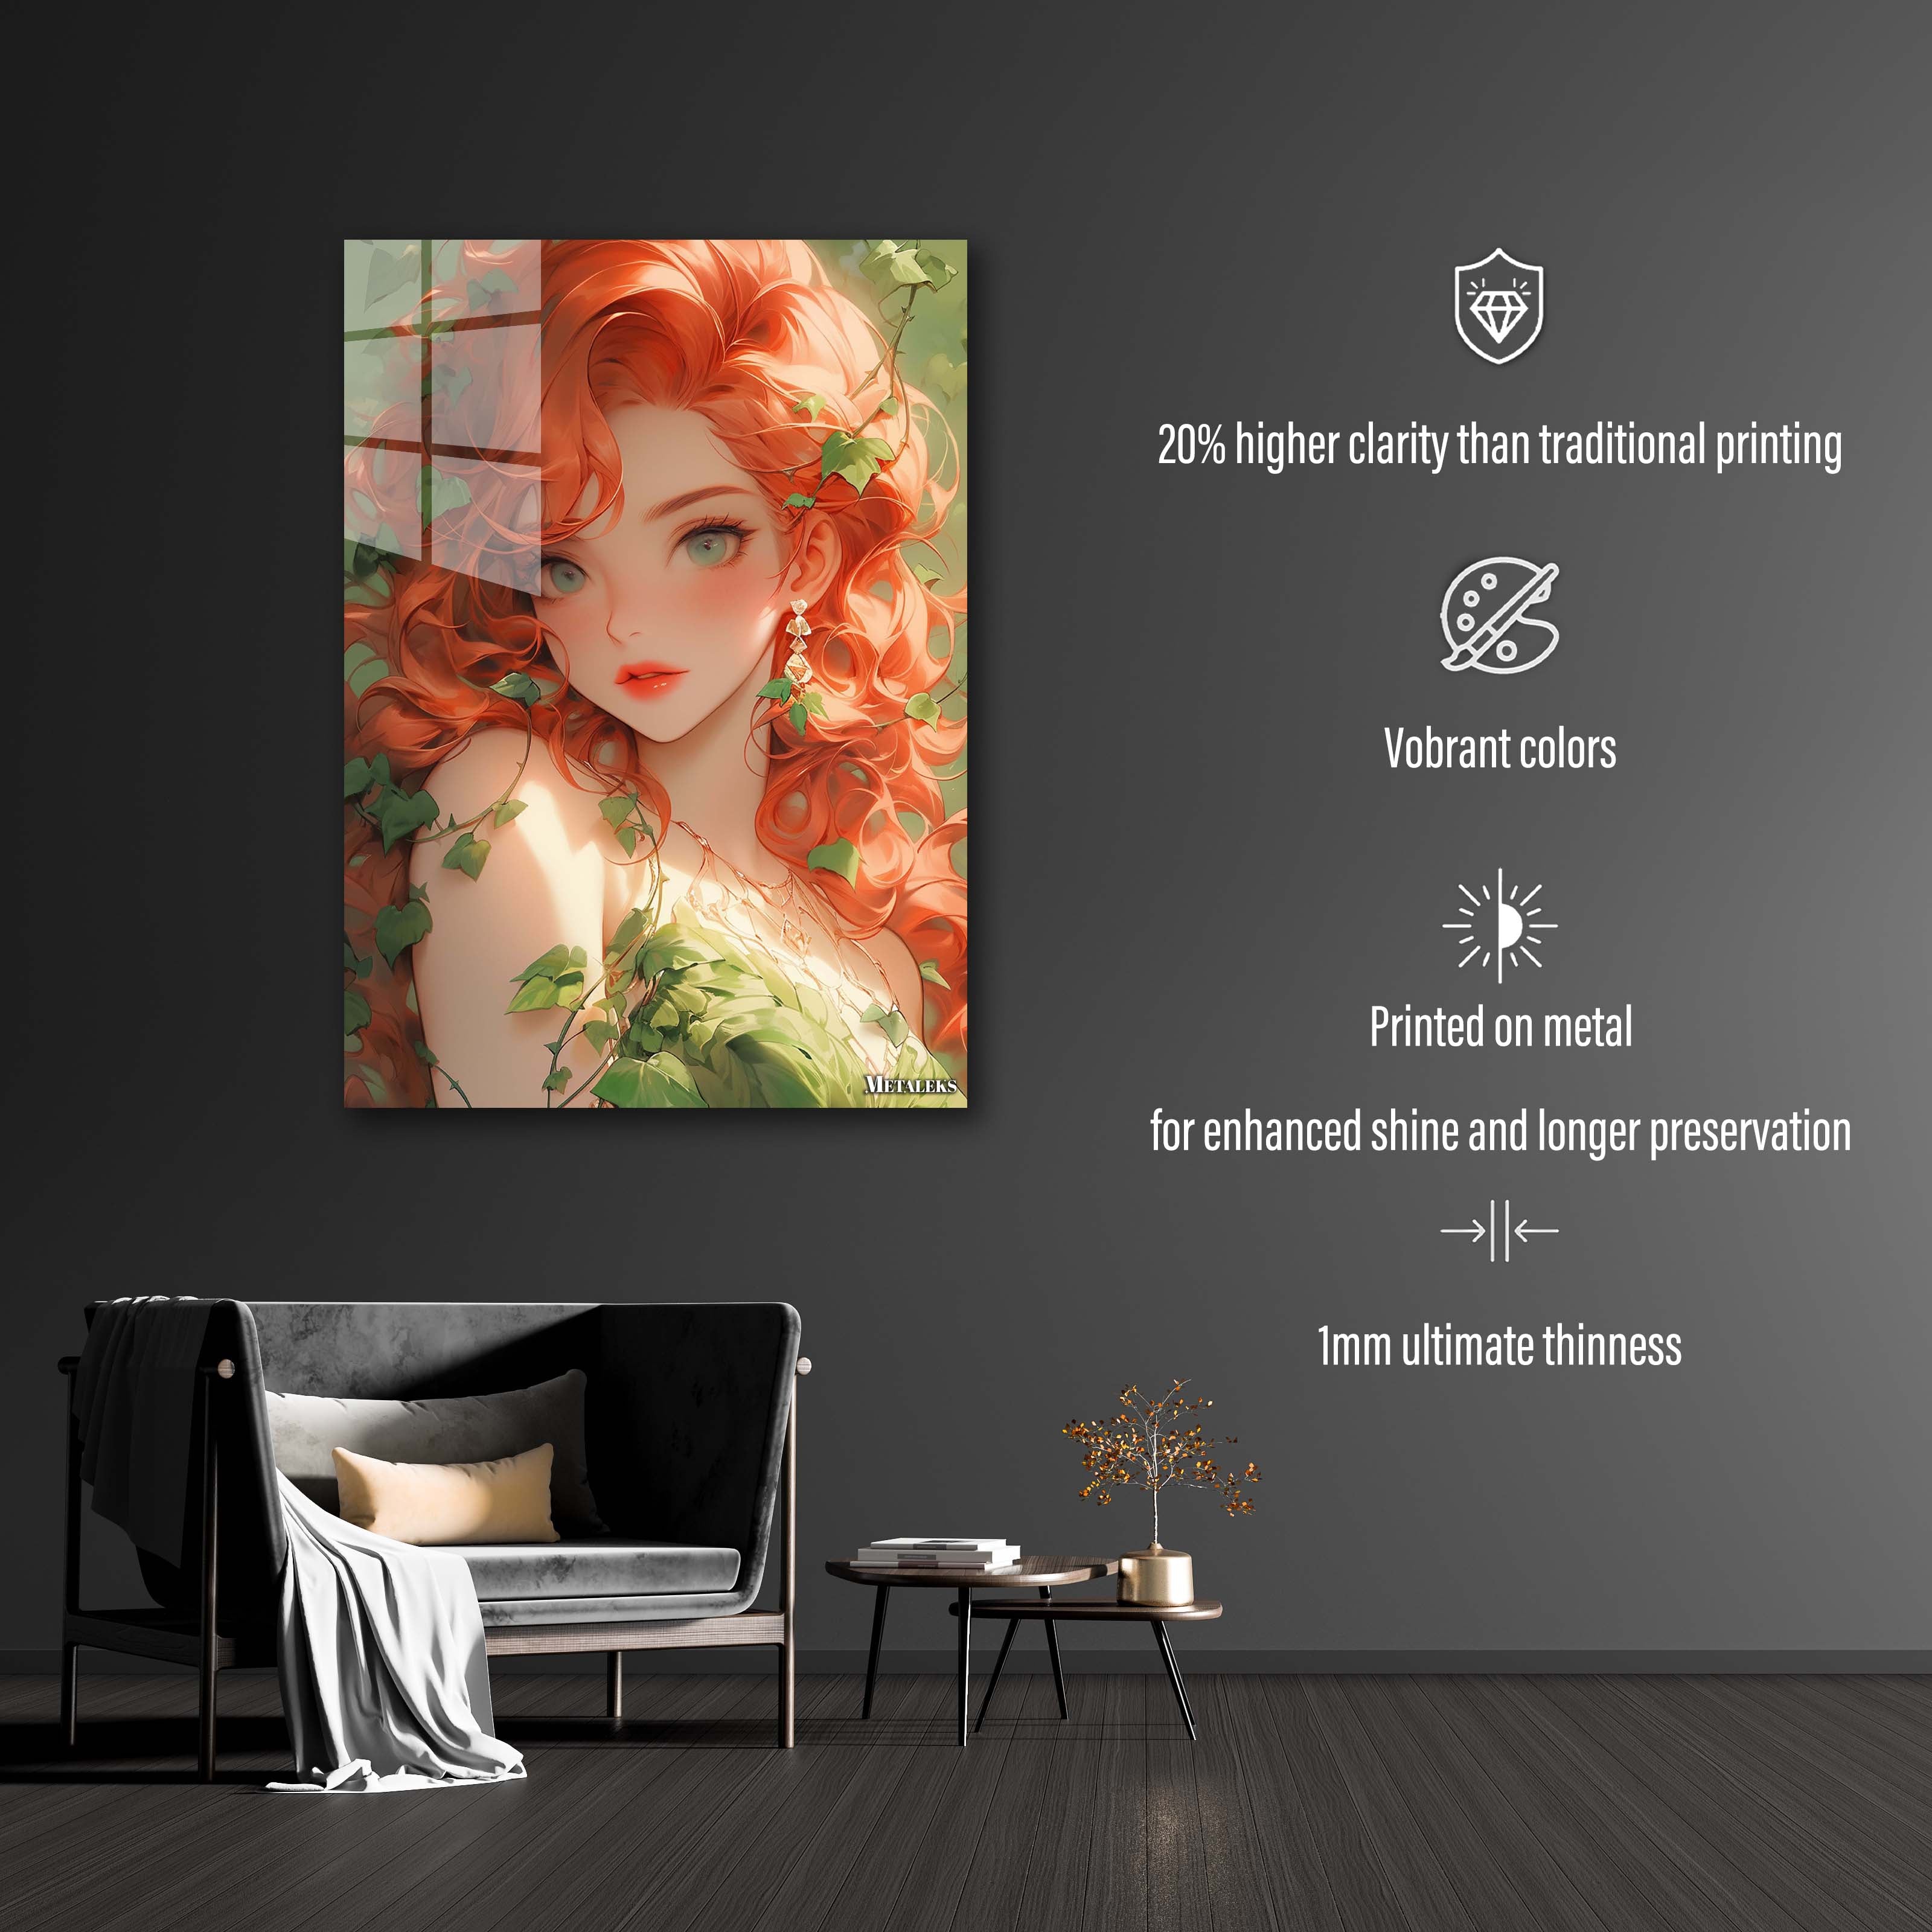 Vine Mistress_ Poison Ivy's Reign Over Gotham's Gardens-designed by @theanimecrossover